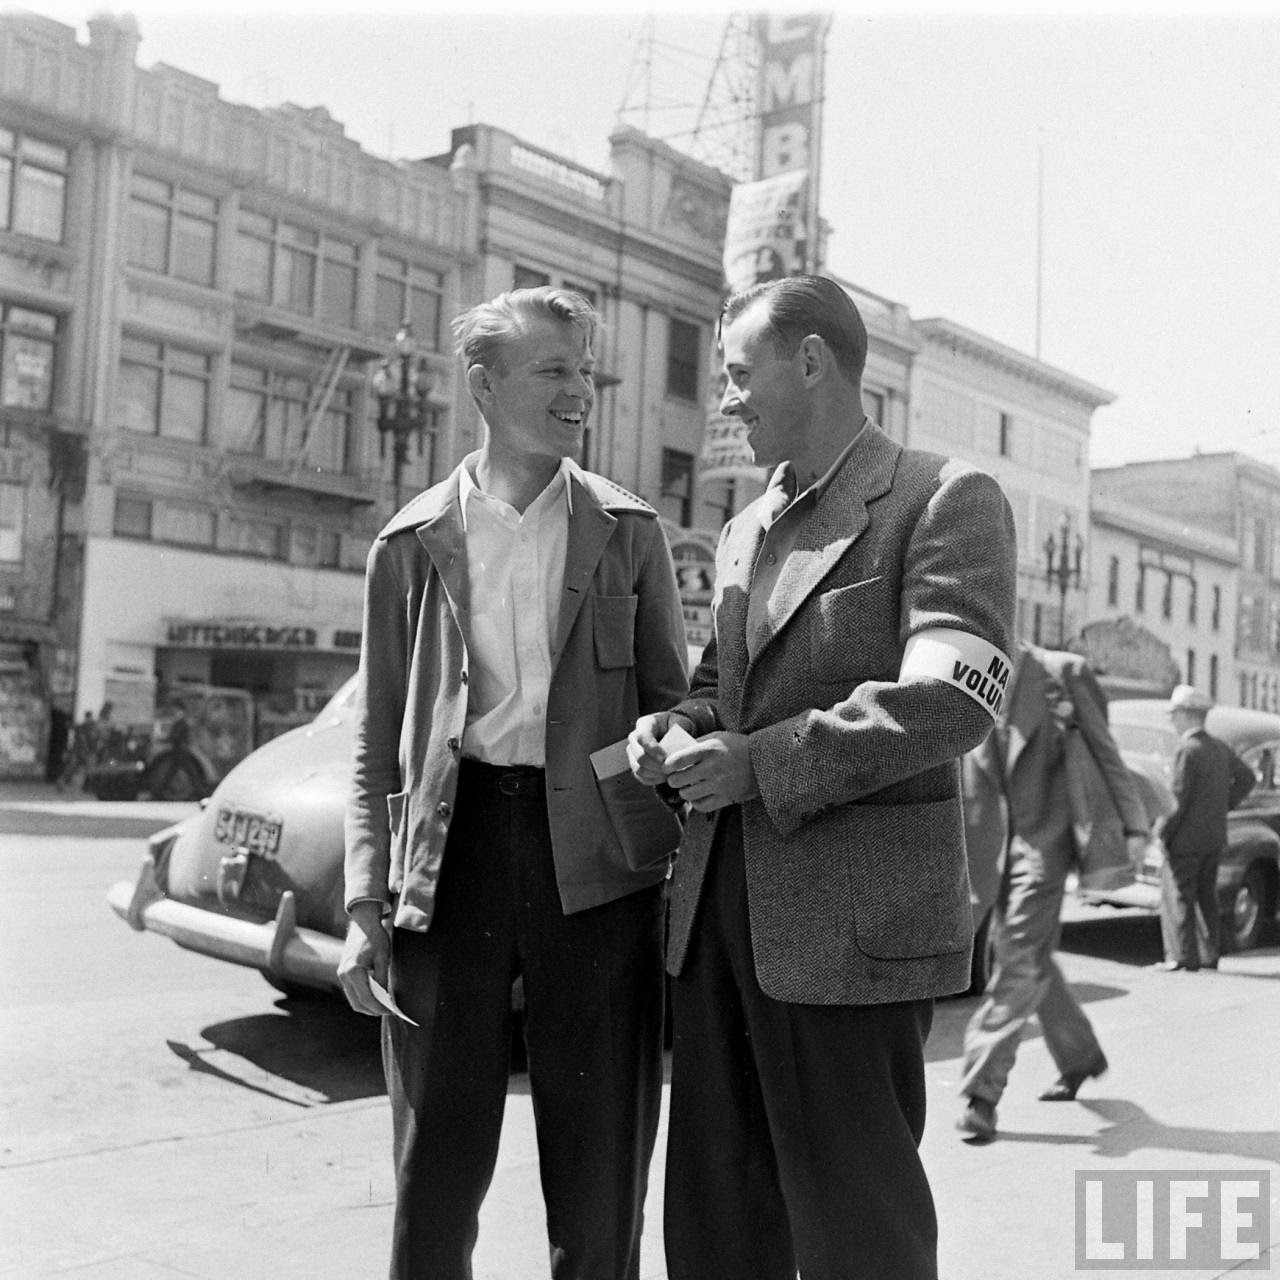 Interesting Black and White Photos Capture Daily Life in San Francisco, 1943 ~ vintage ...1280 x 1280